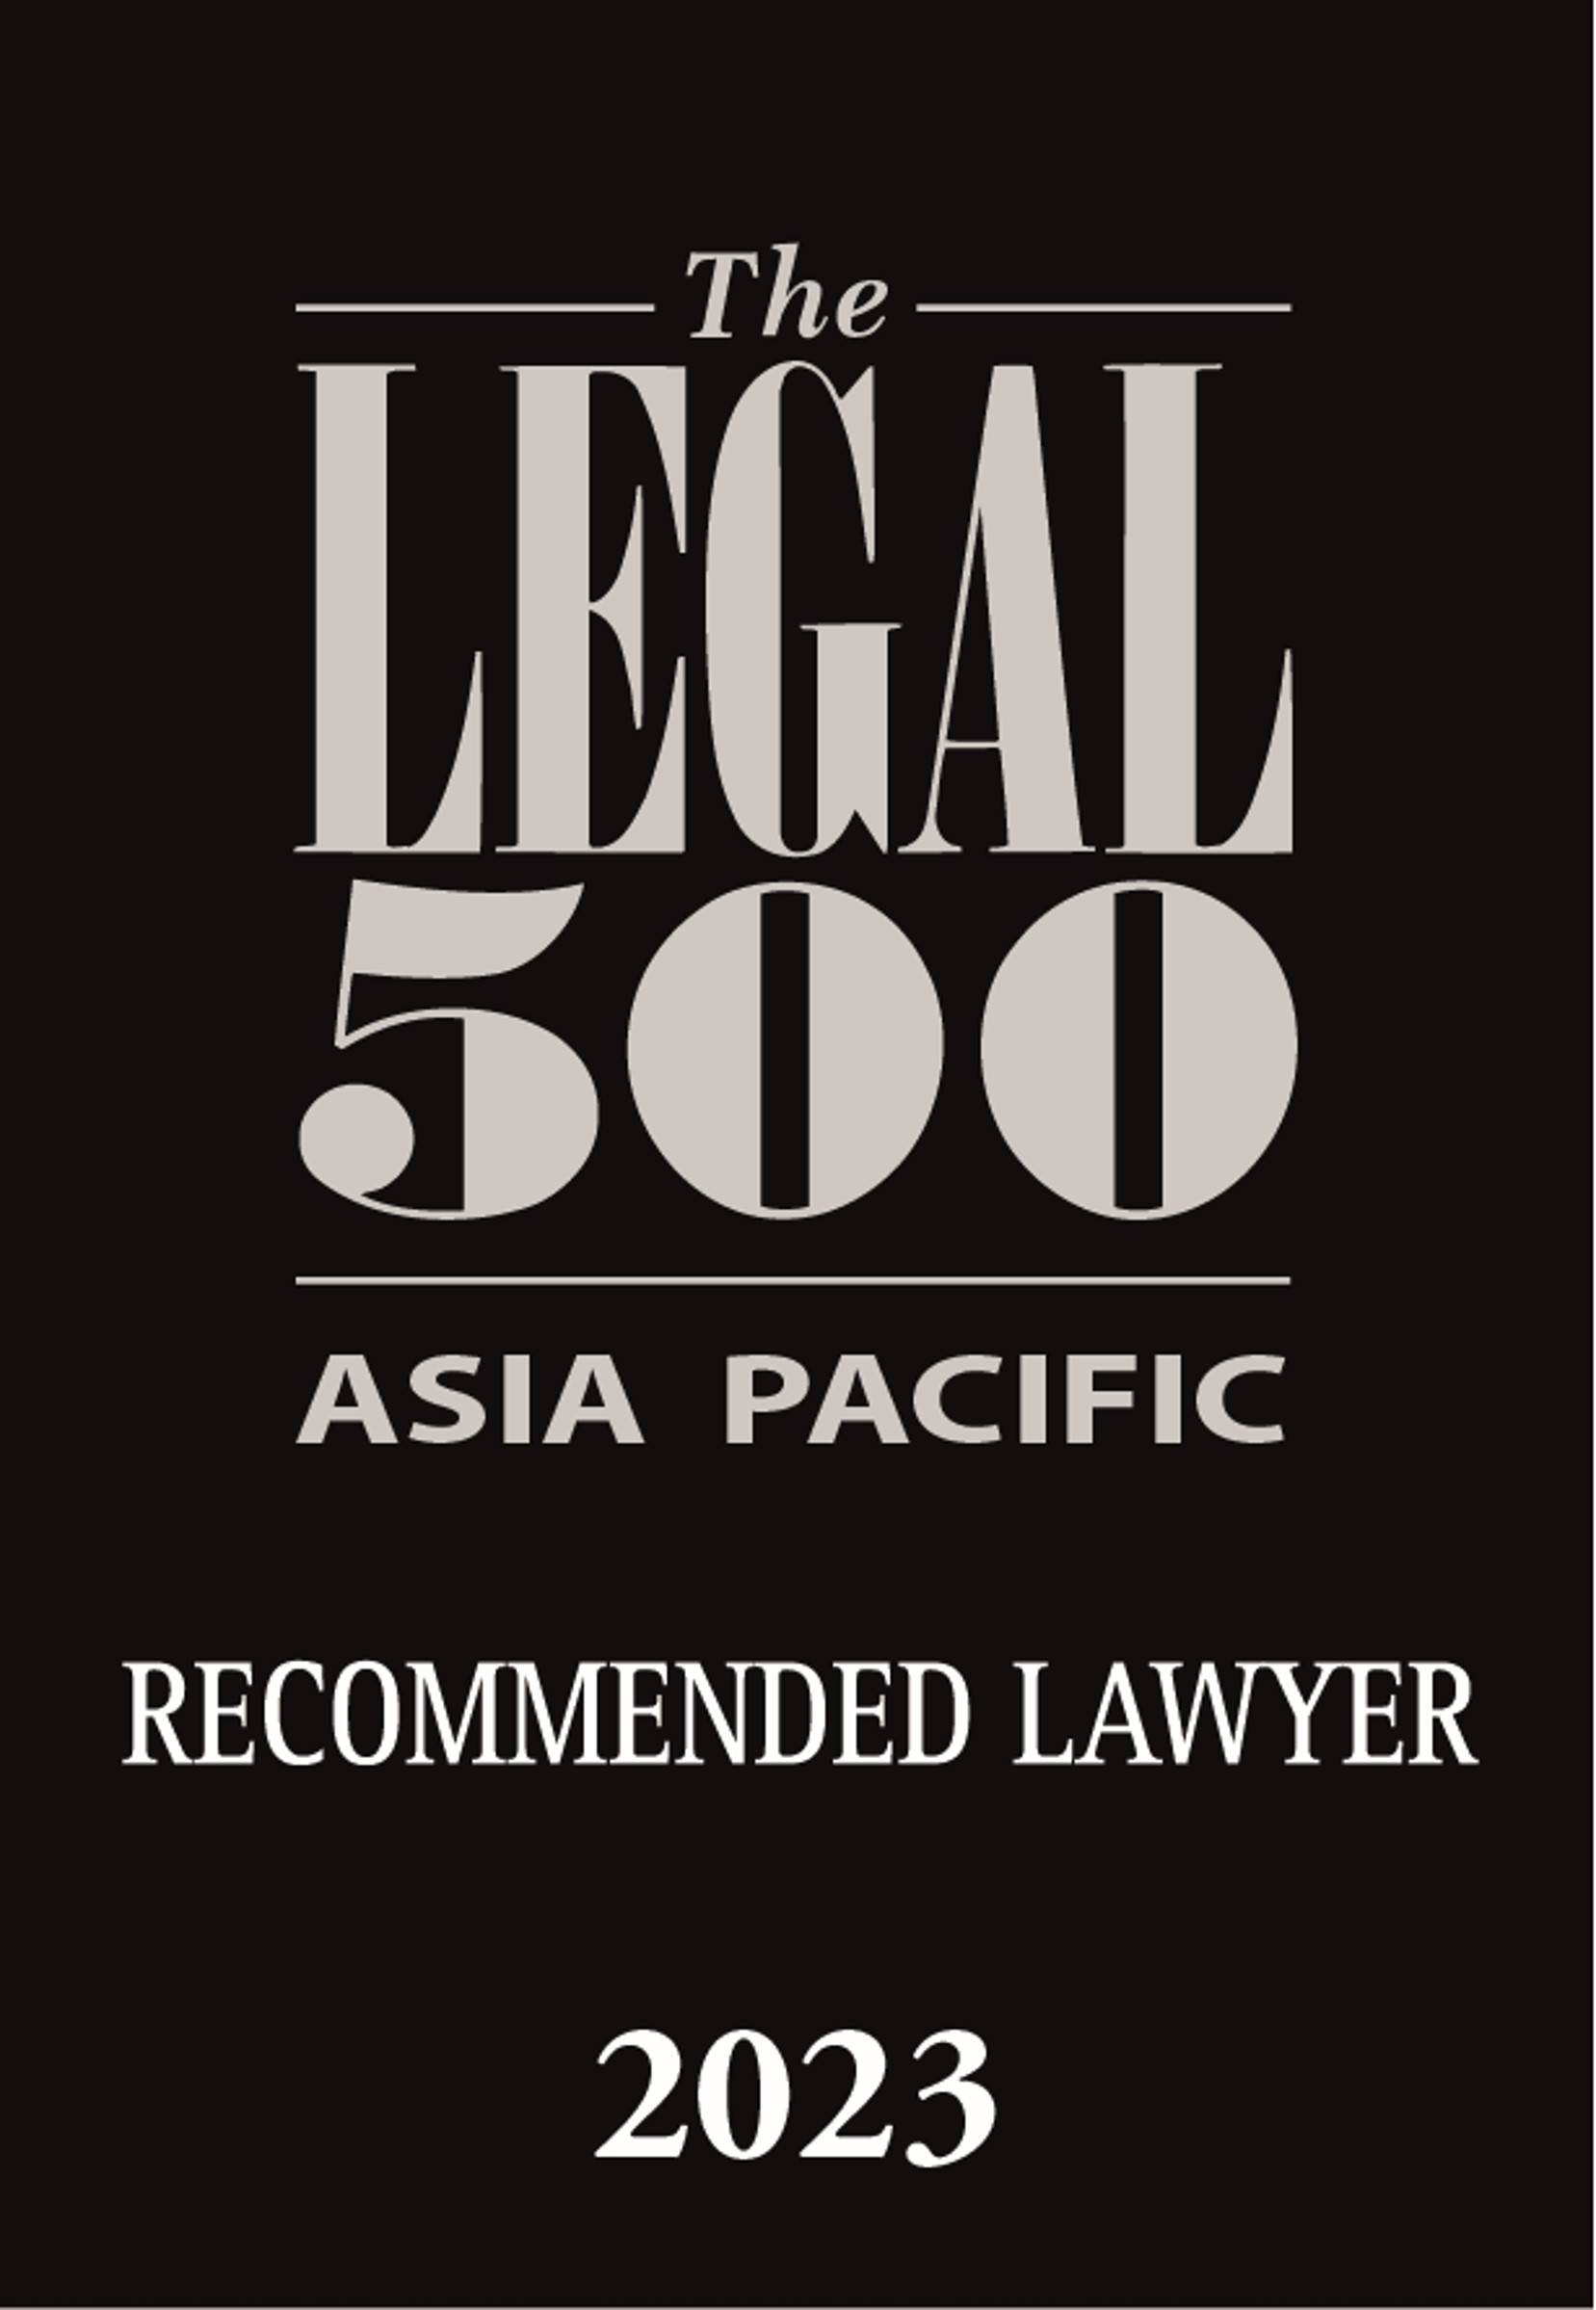 Rossana Chu, Recommended Lawyer, 2023